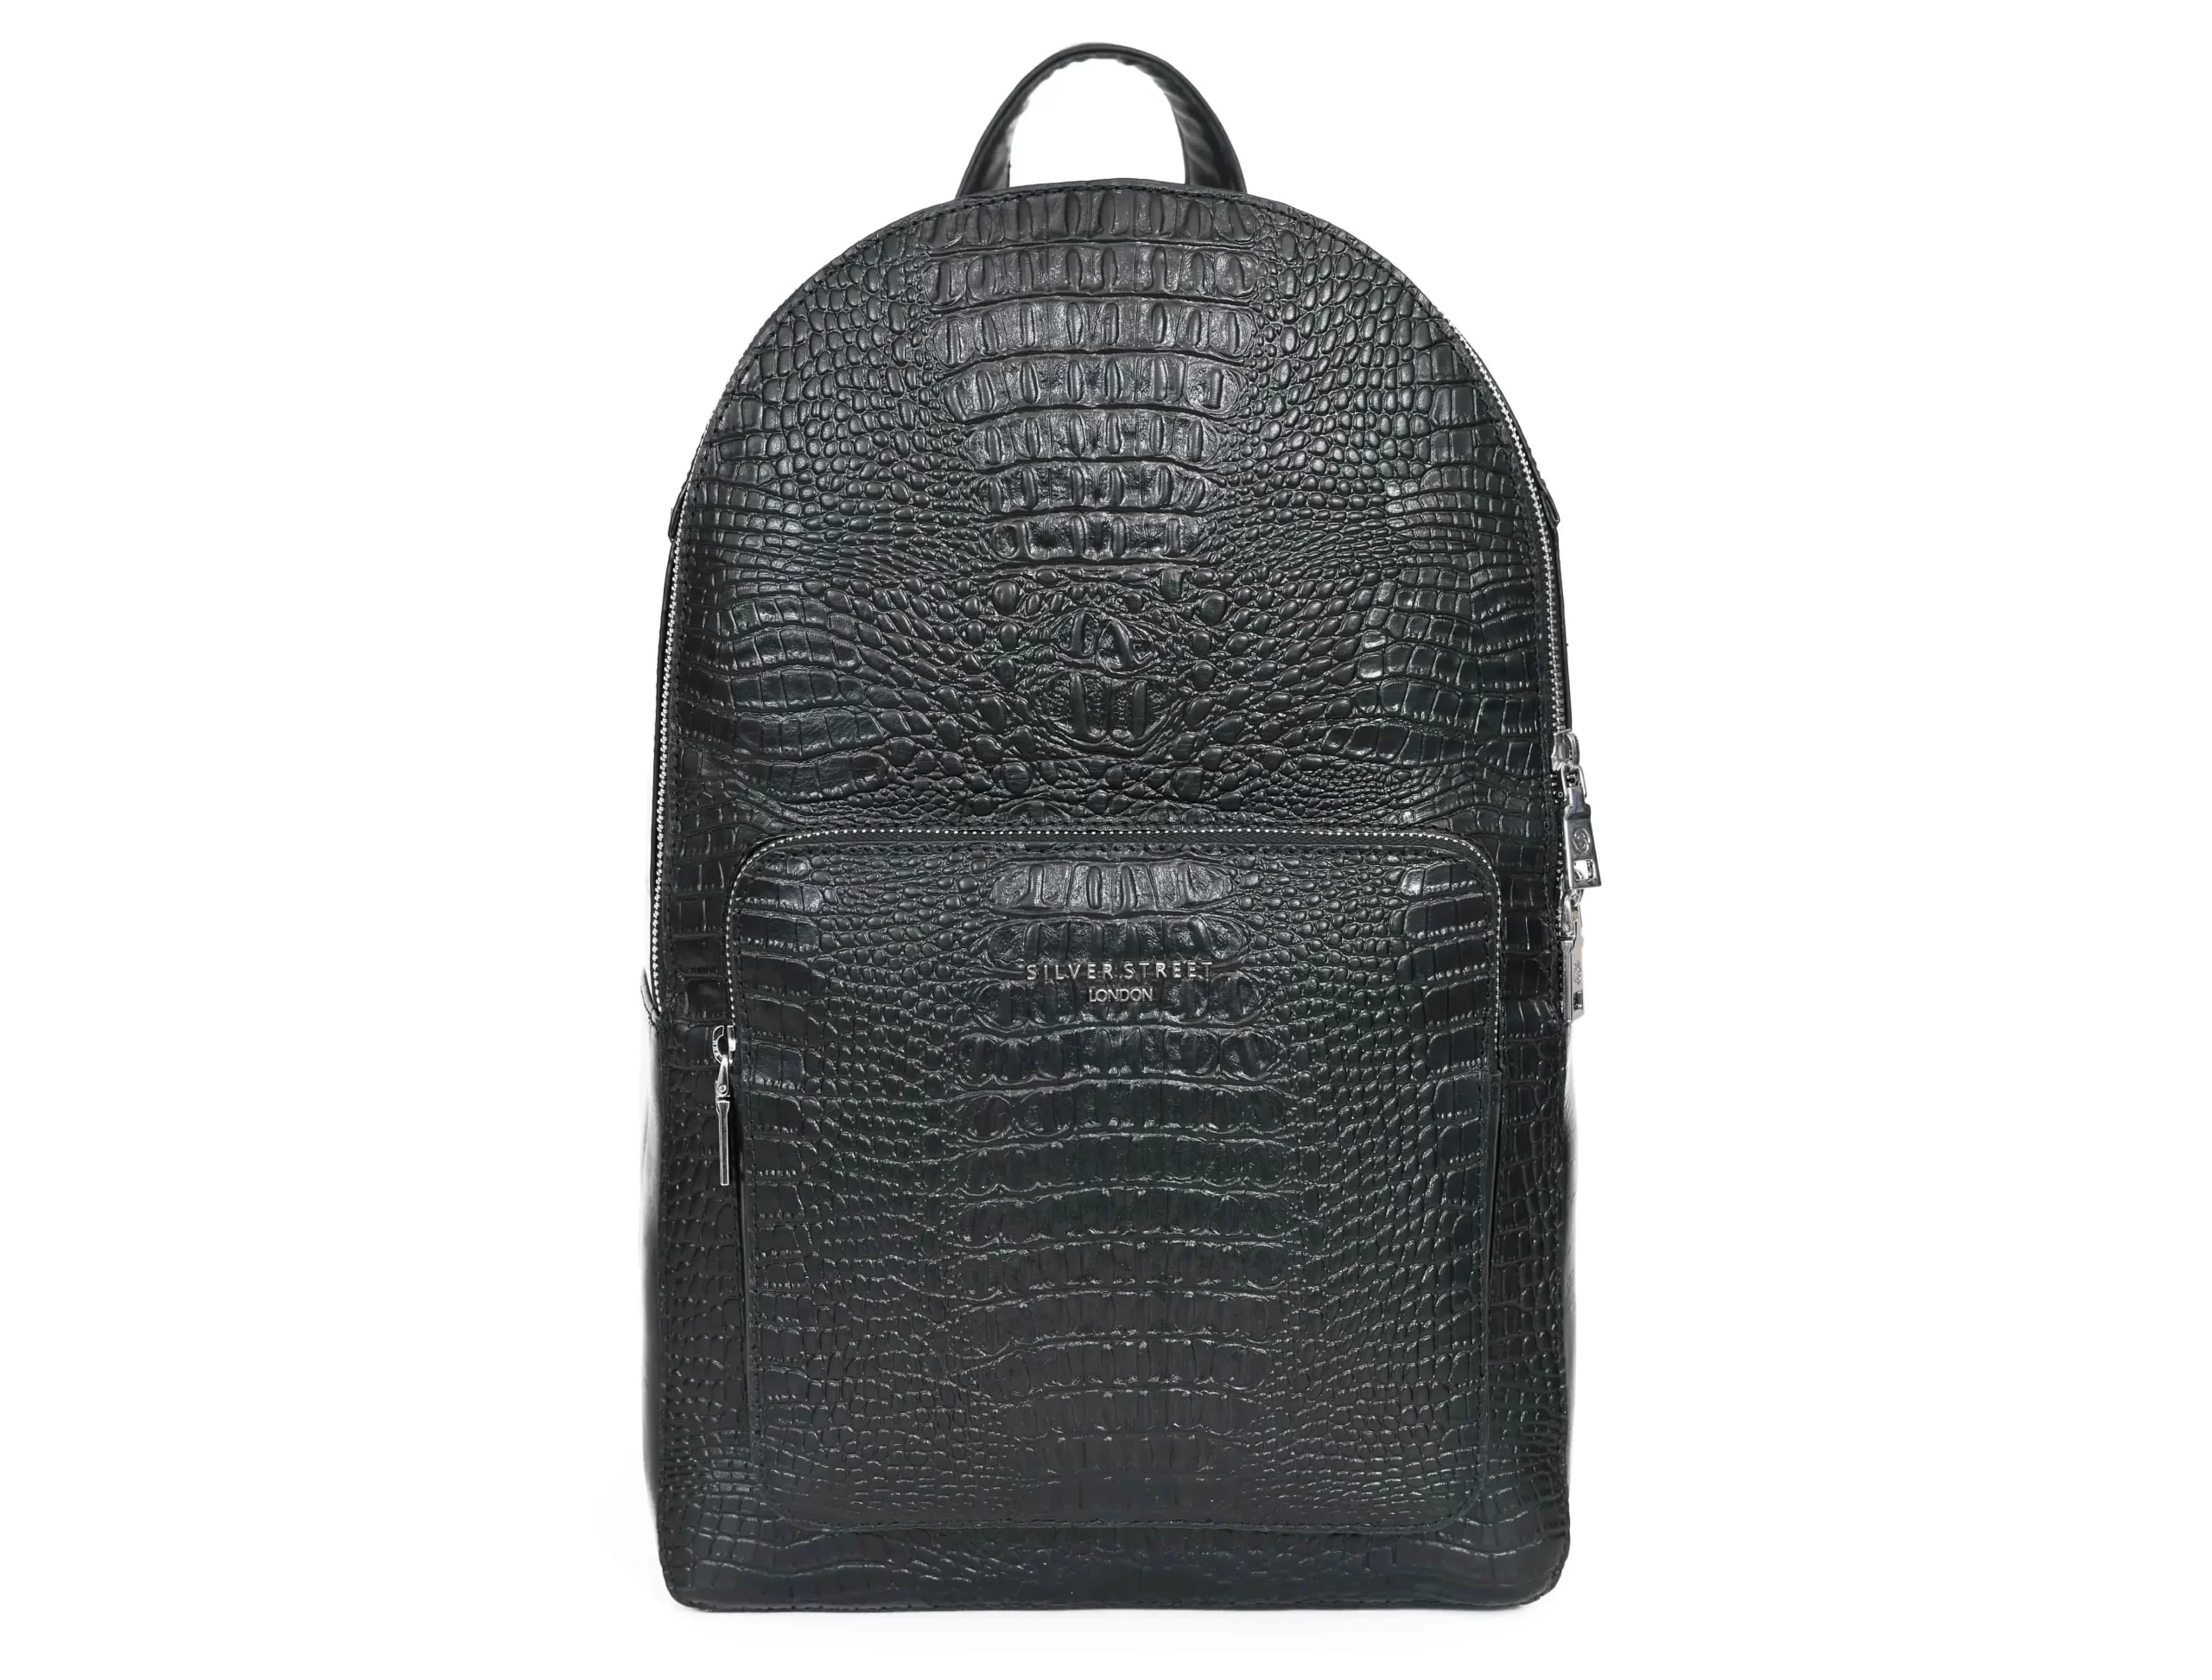 CROCO Textured Black Leather Backpack - Silver Street London